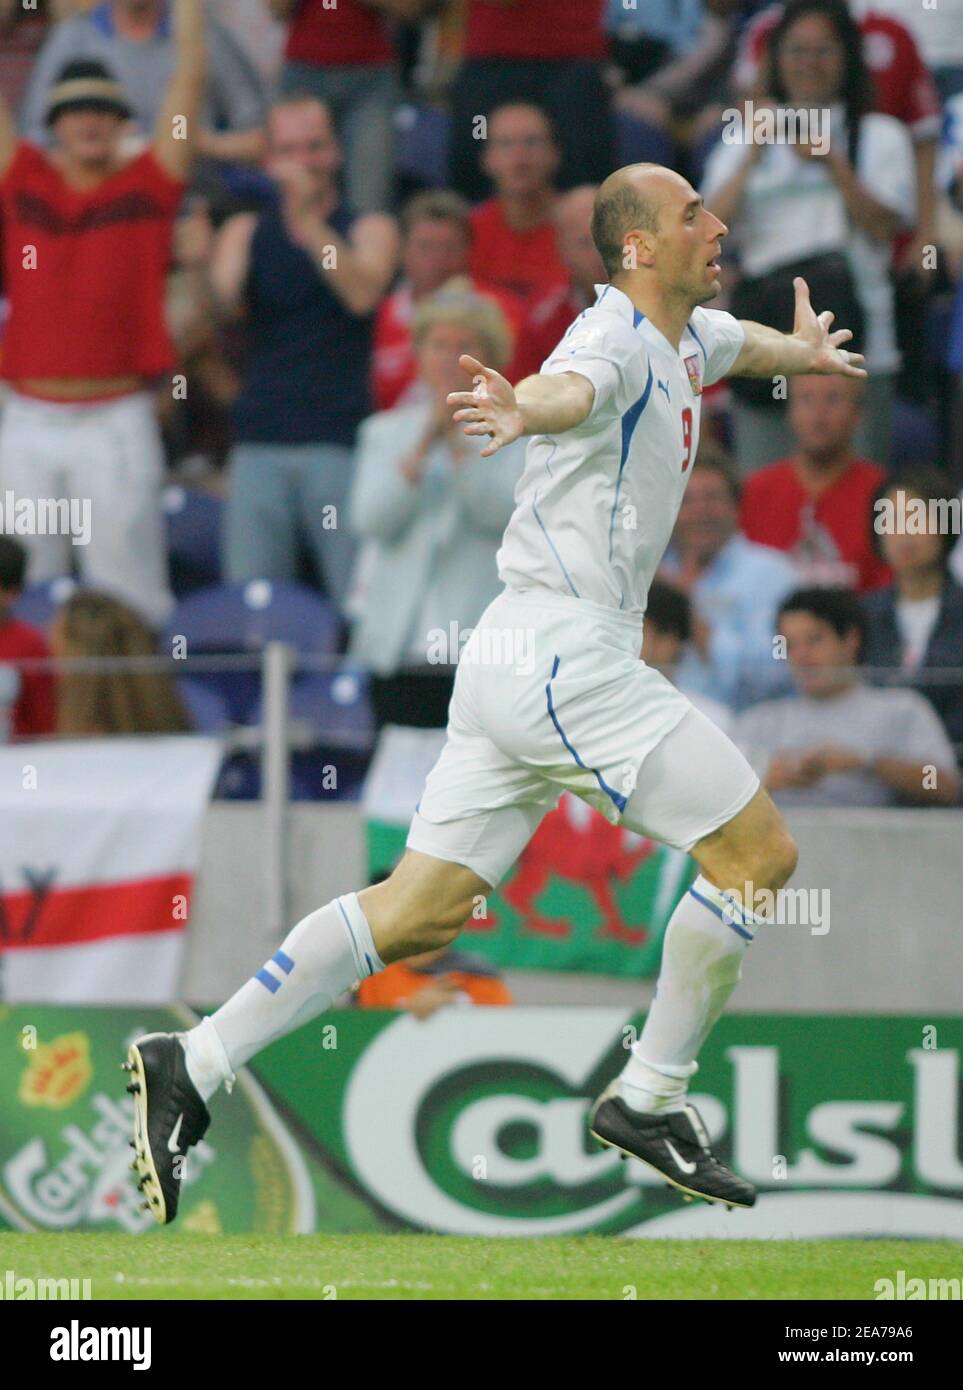 Czech Republic's Jan Koller after the goal during Euro 2004 in Portugal on June 27, 2004. Photo by Christian Liewig/ABACAPRESS.COM Stock Photo